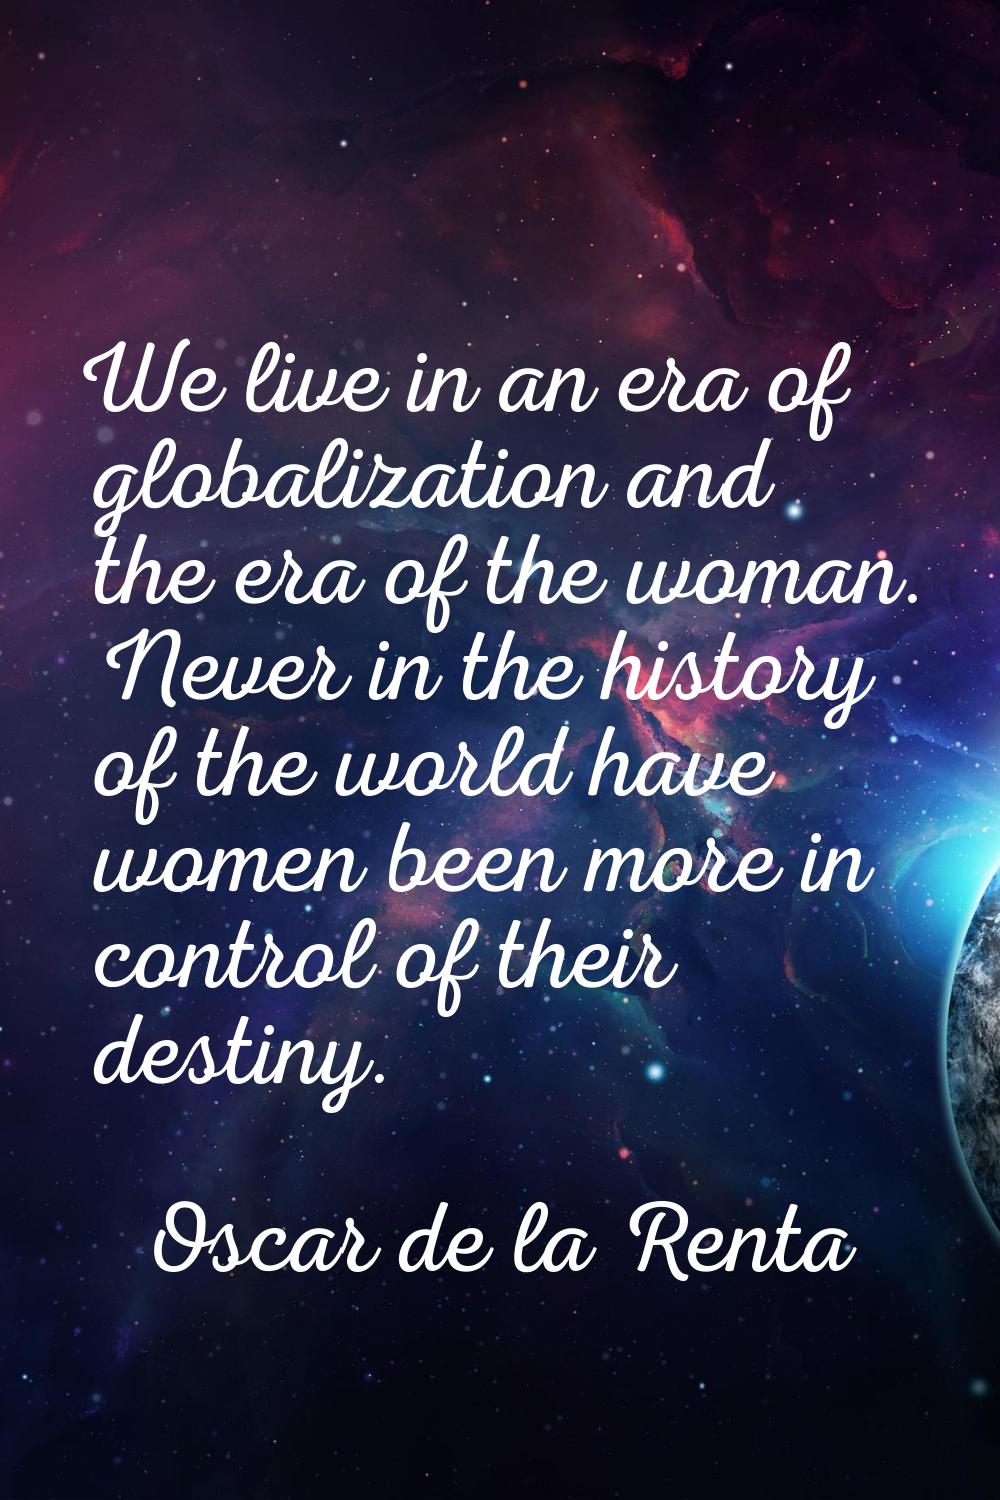 We live in an era of globalization and the era of the woman. Never in the history of the world have